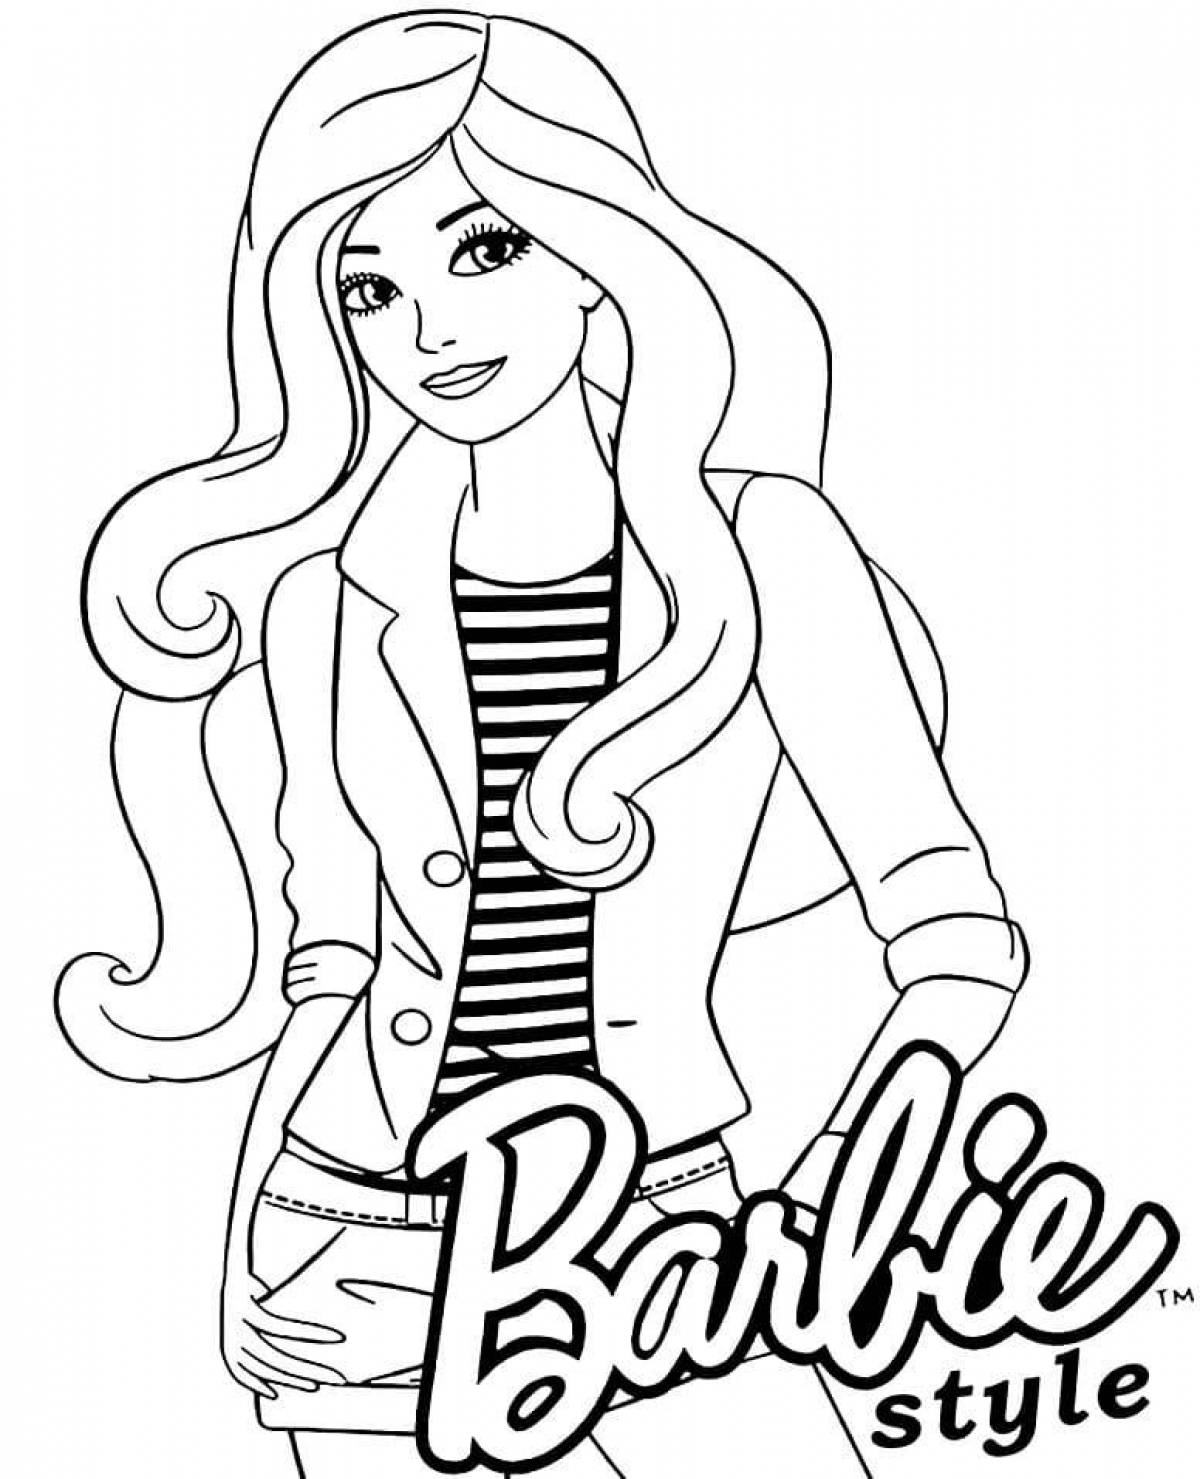 Exotic barbie coloring page